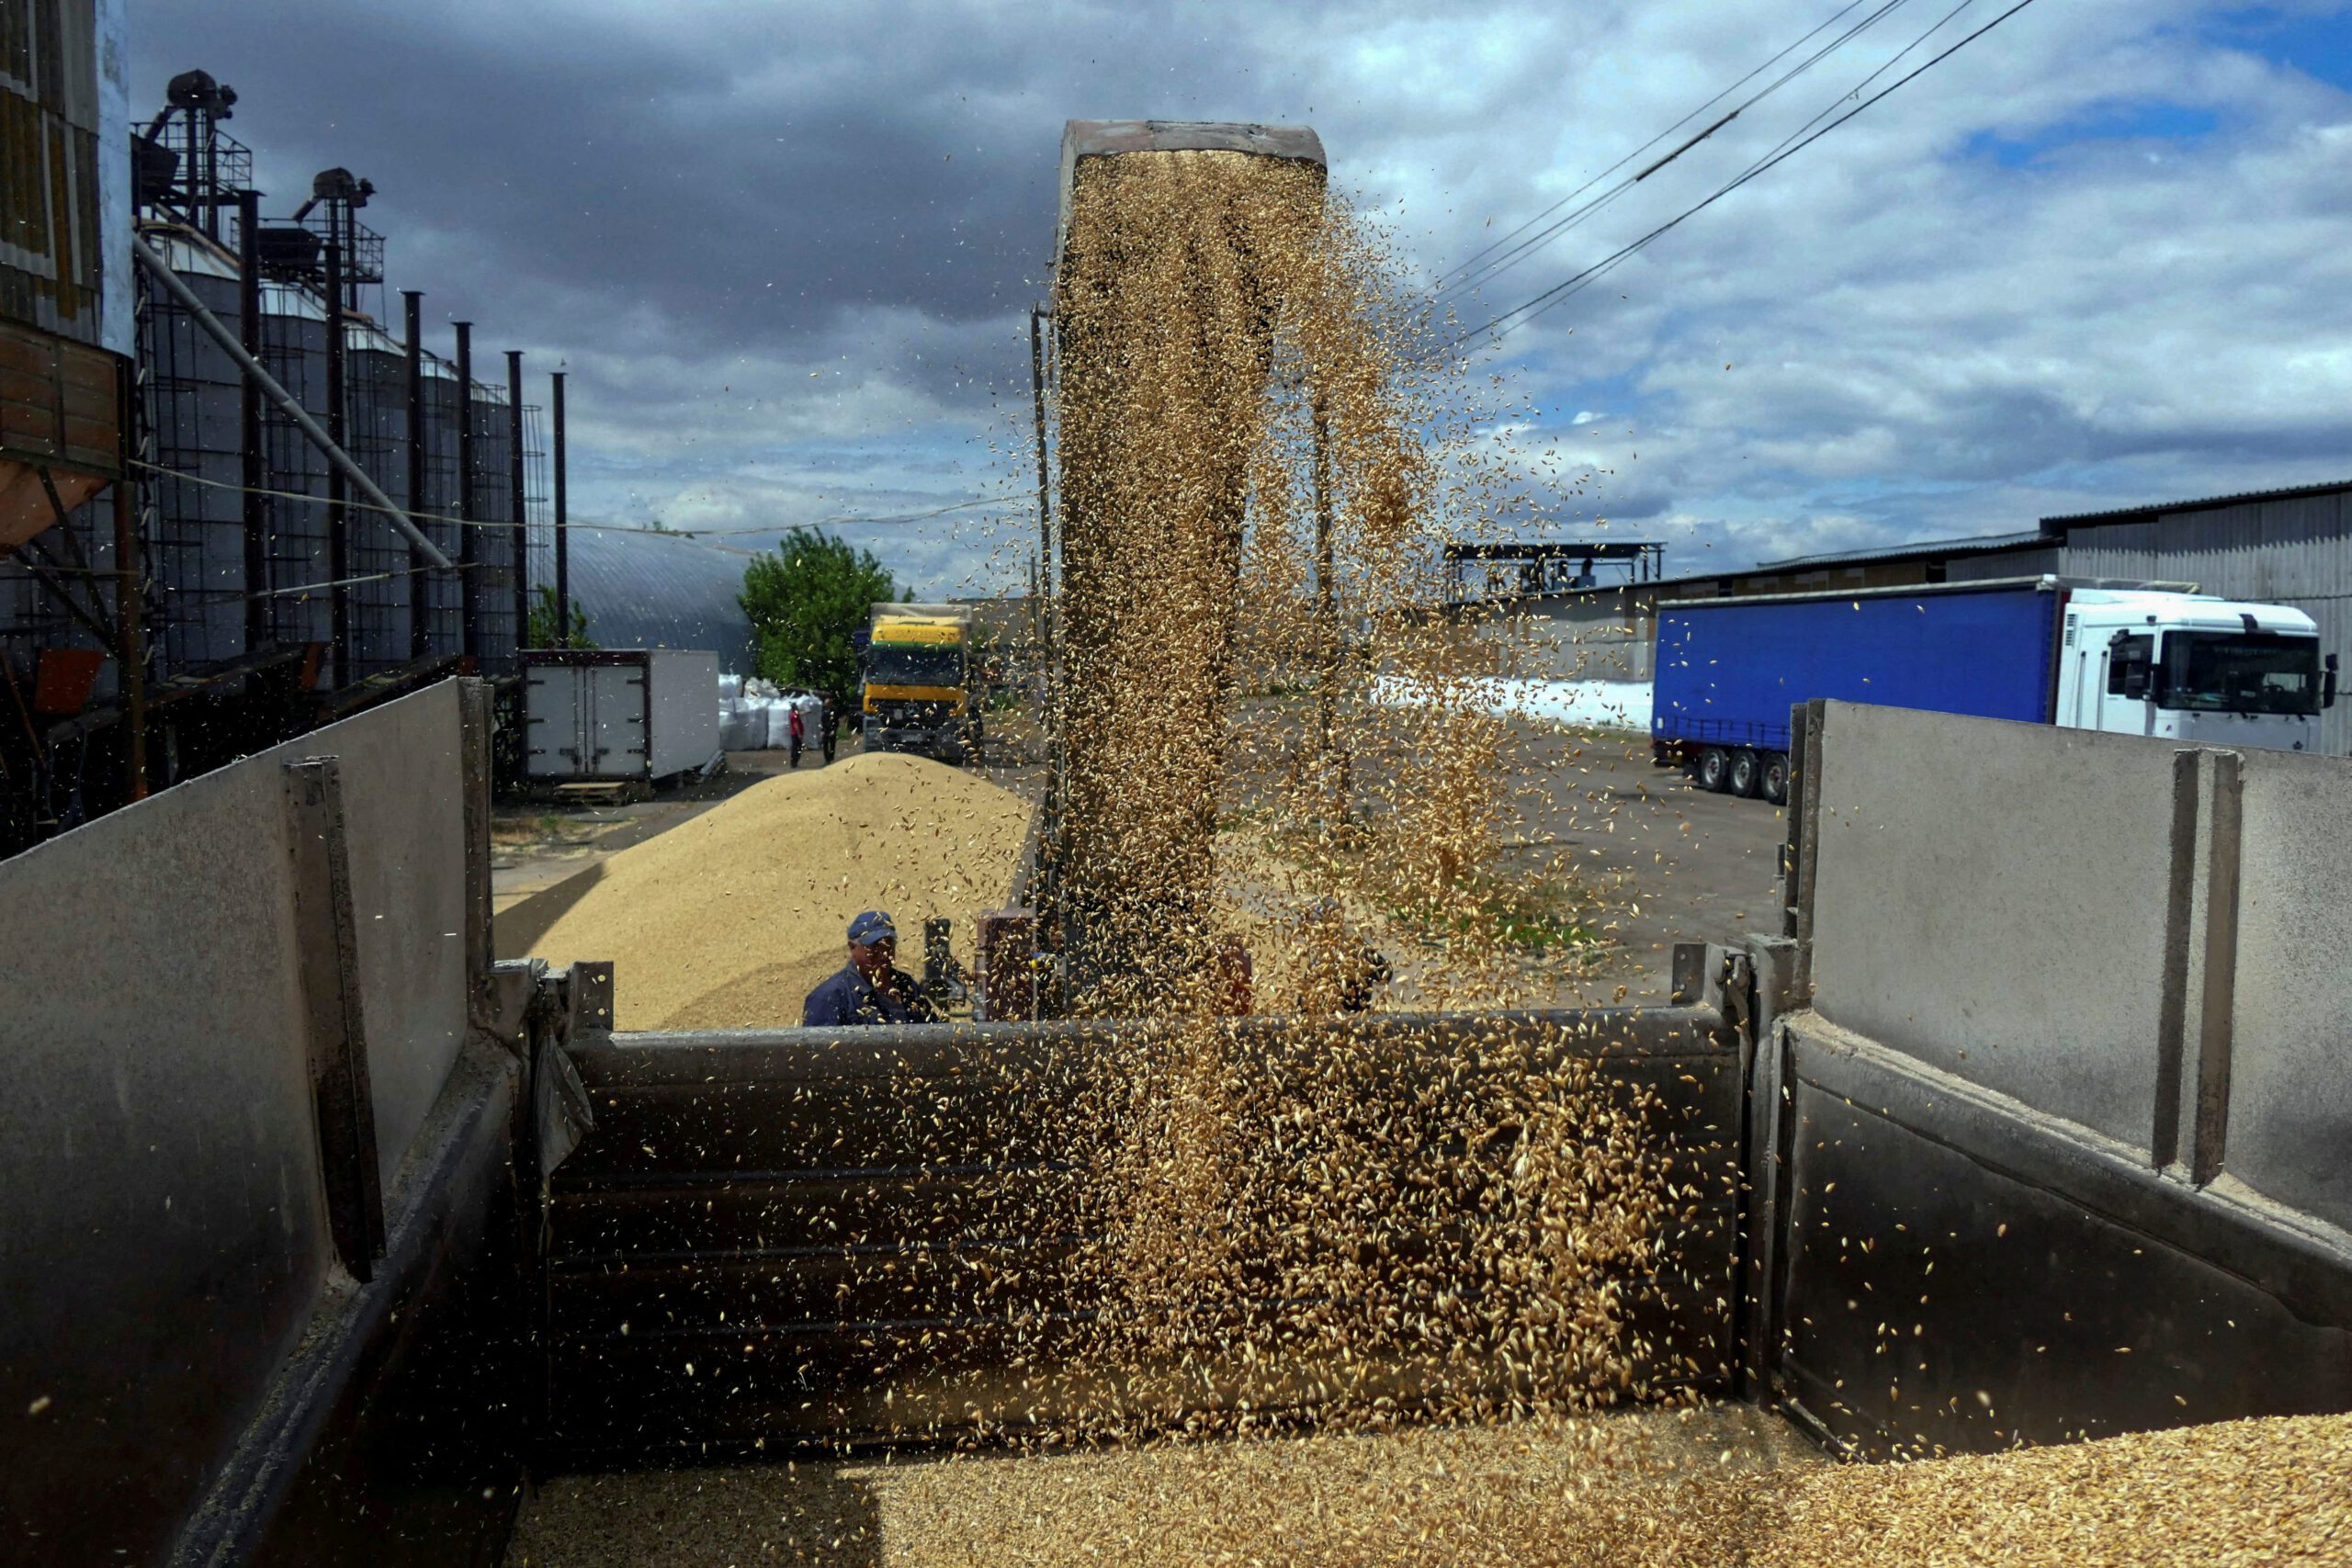 A worker loads a truck with grain at a terminal during barley harvesting in Odesa region, as Russia's attack on Ukraine continues, Ukraine June 23, 2022. Photo REUTERS/Igor Tkachenko